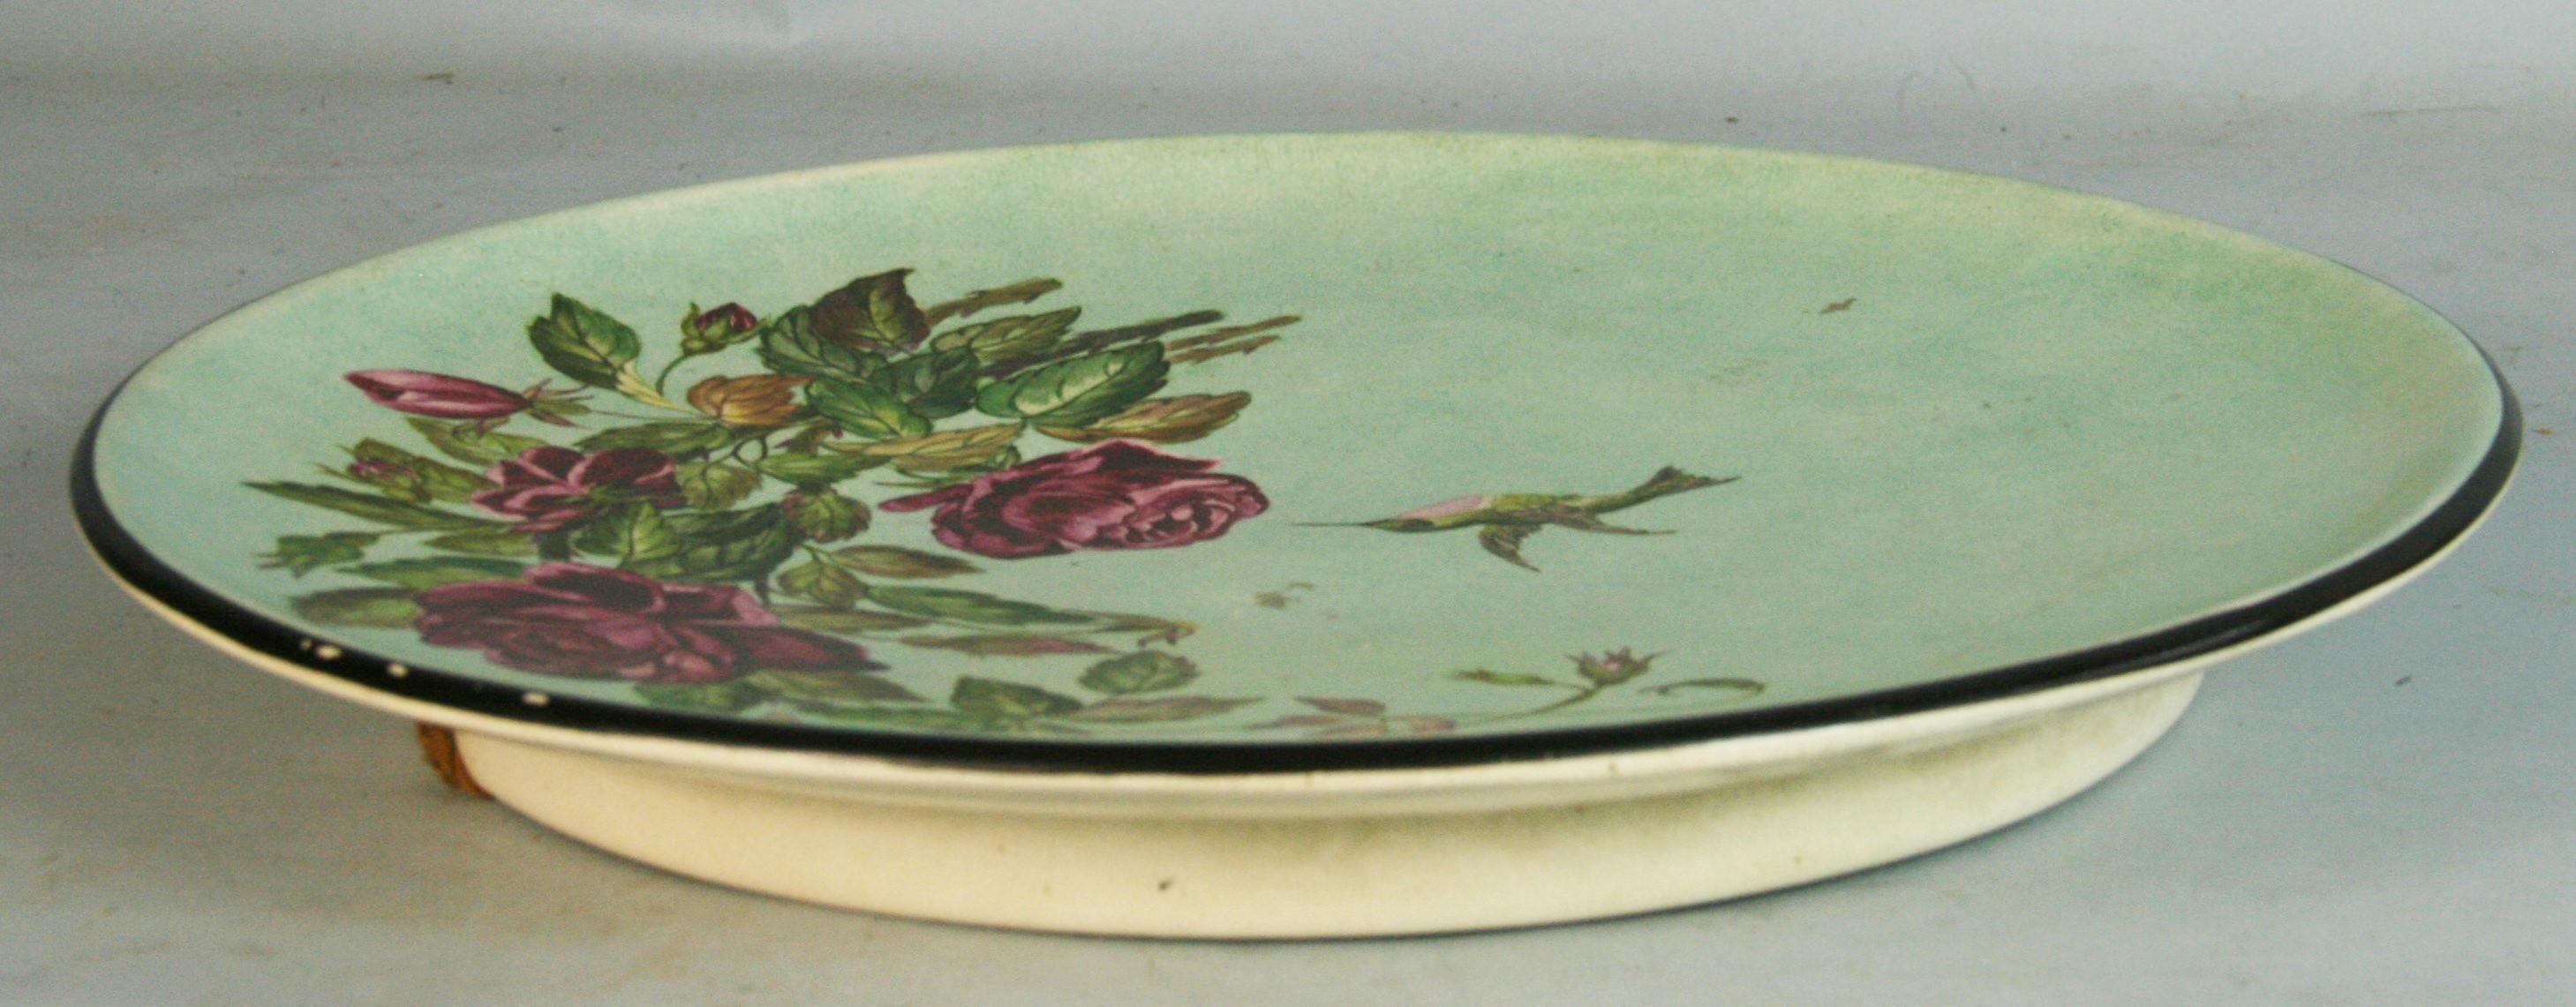 Vintage English   Ceramic  Charger with Humming Birds and Roses Decorations 1940 For Sale 5